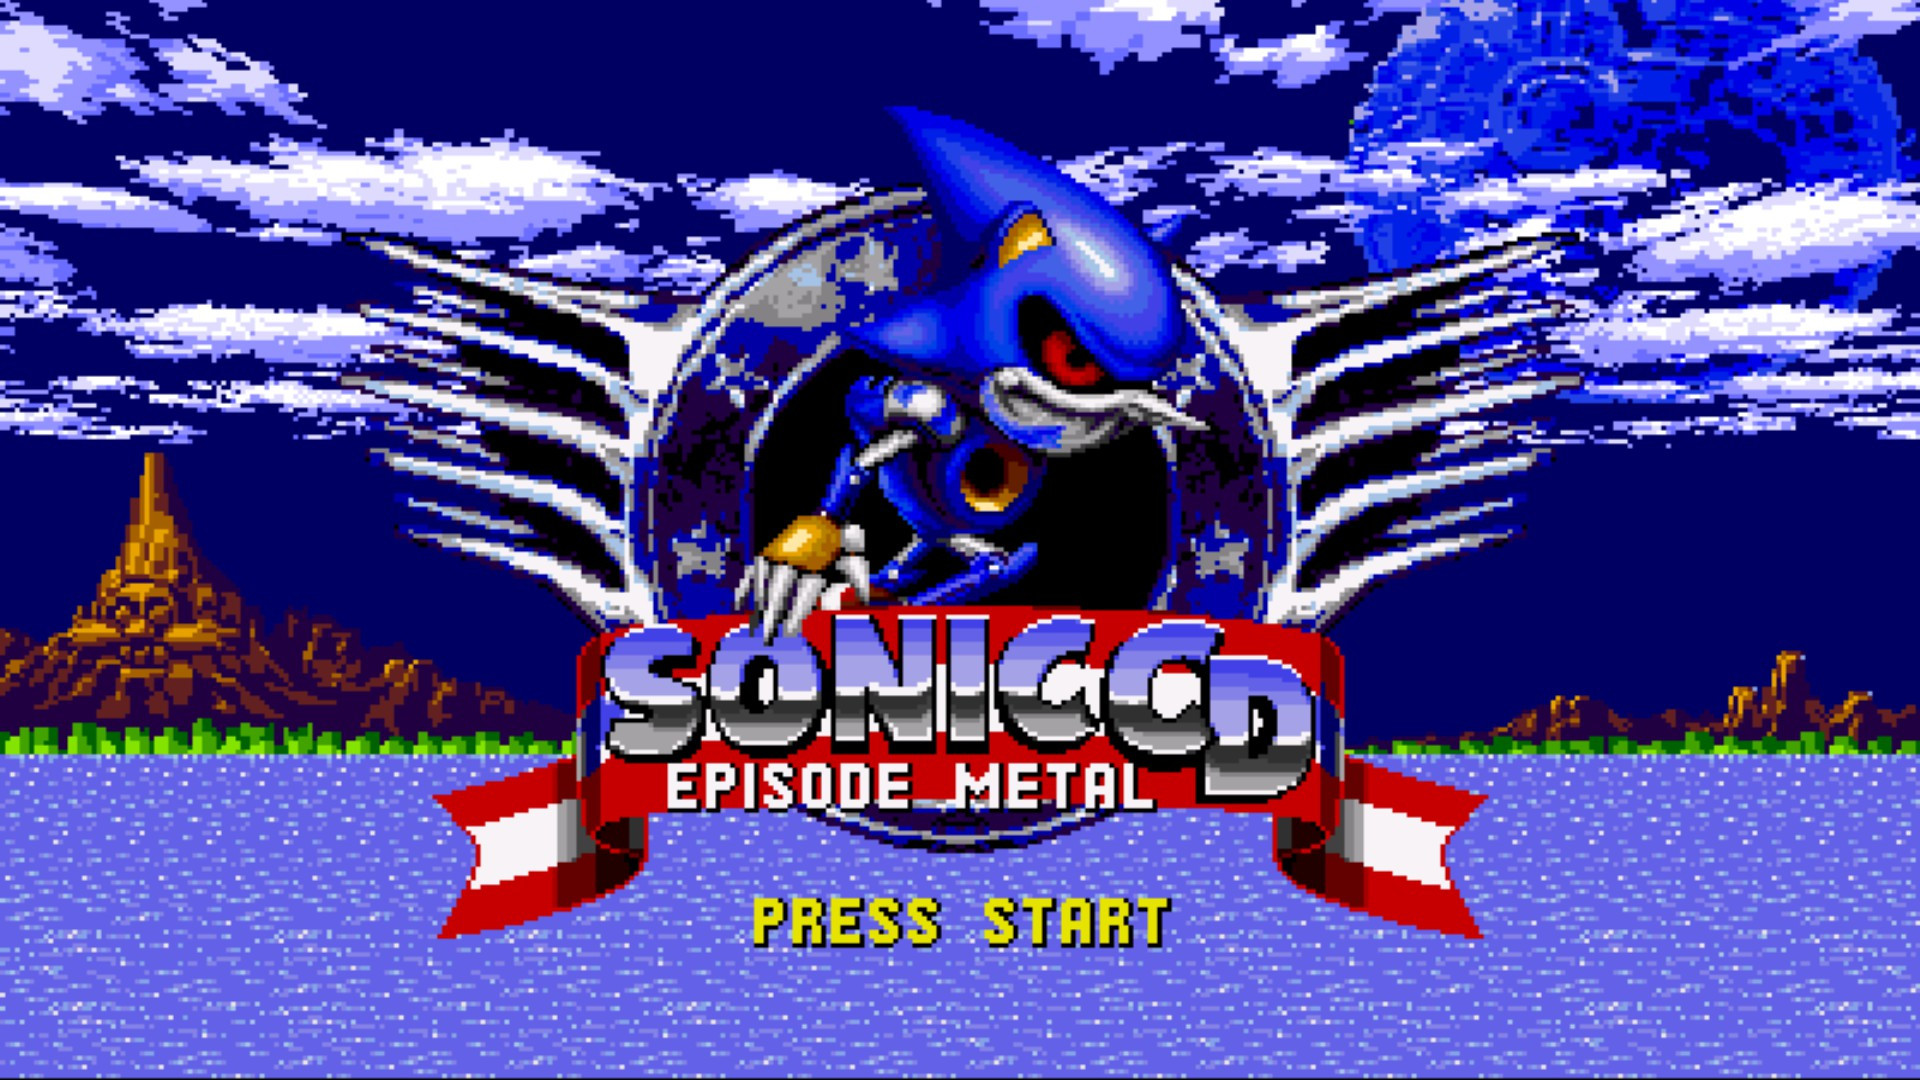 Play Mecha Sonic 2 for free without downloads